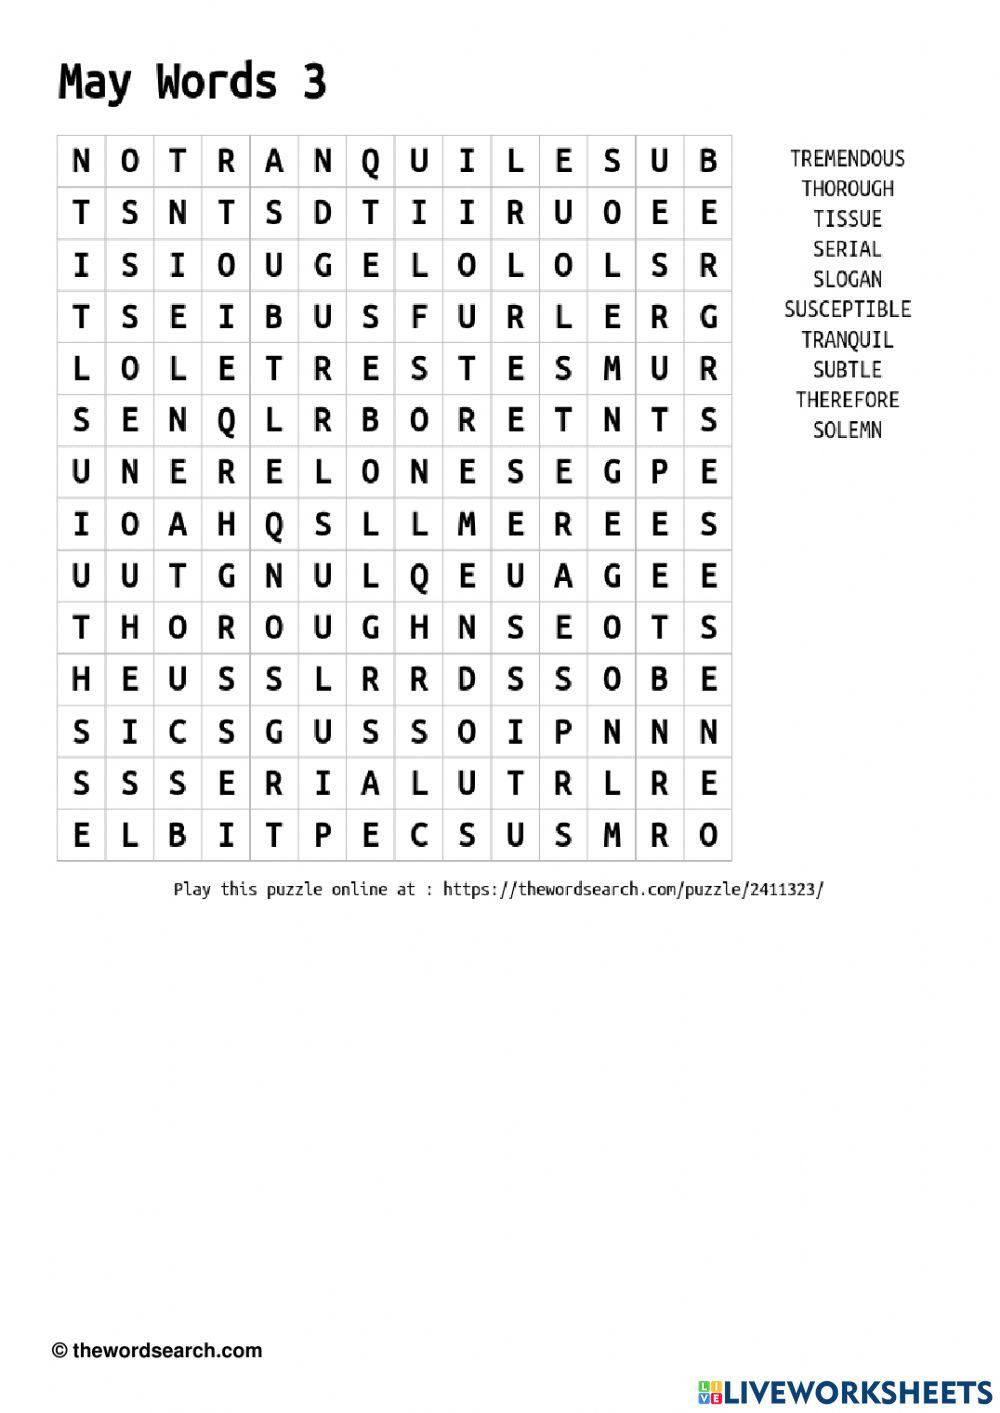 May Words 3 Wordsearch